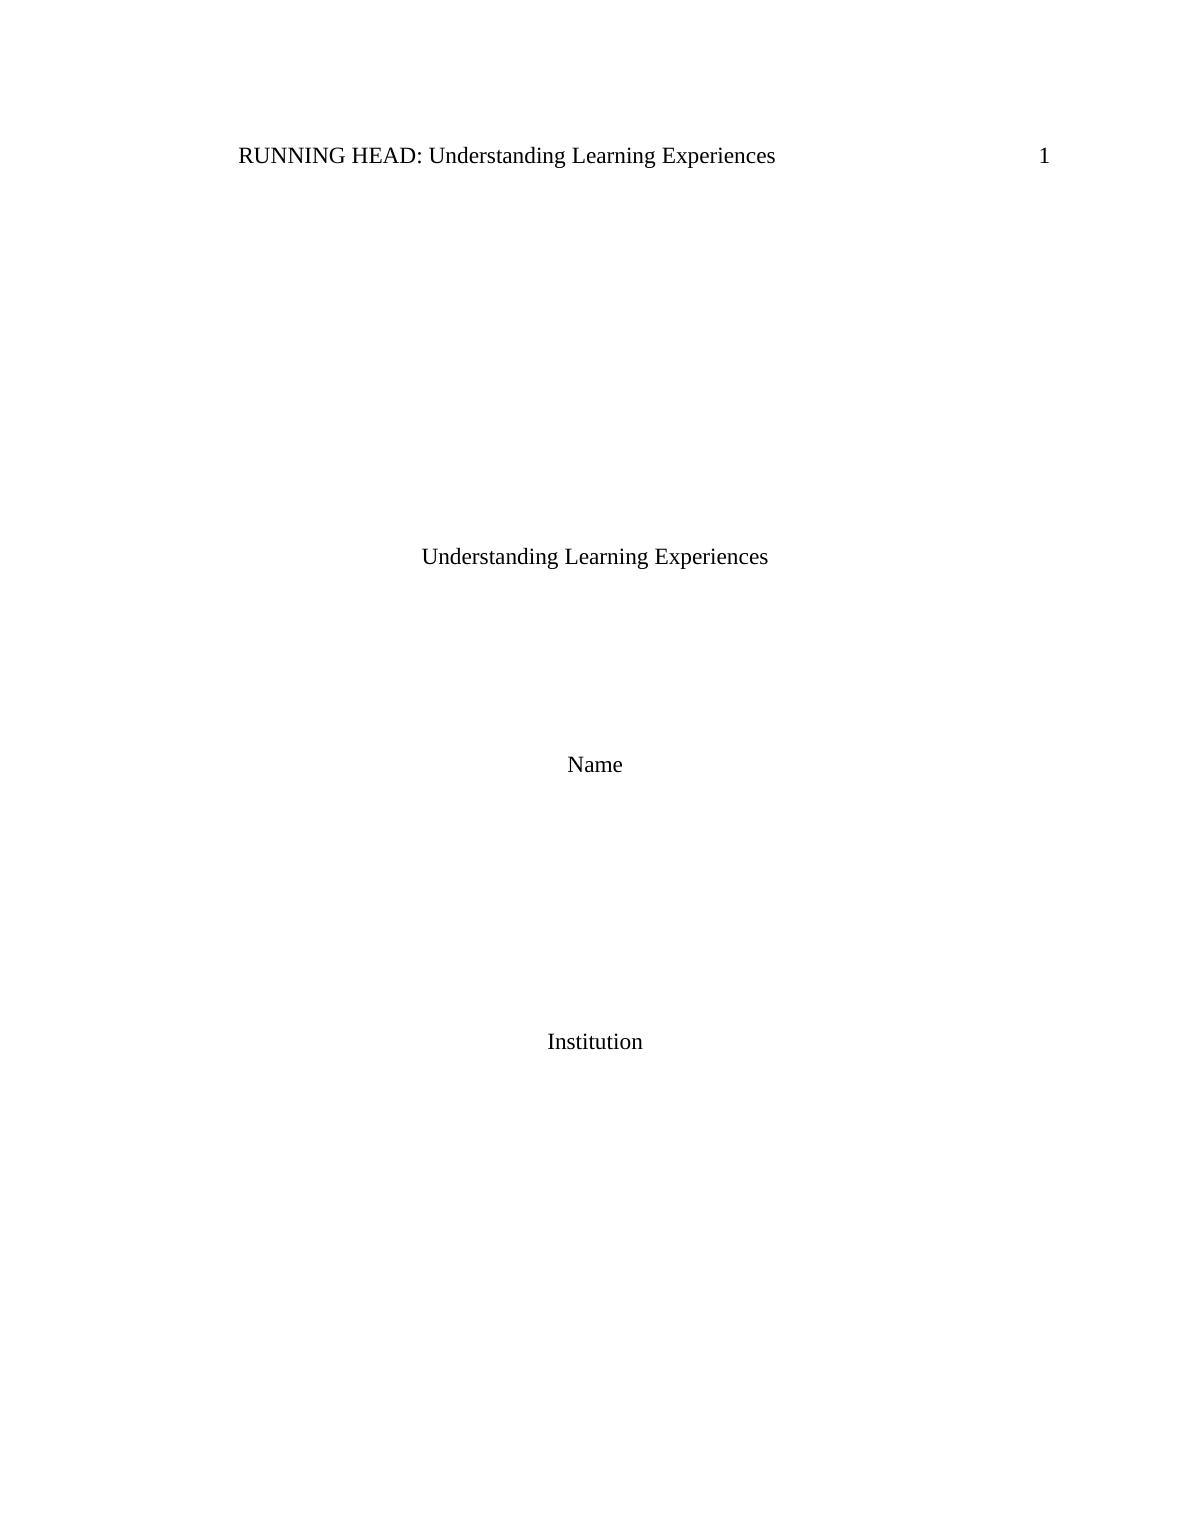 Understanding Learning Experience Assignment_1